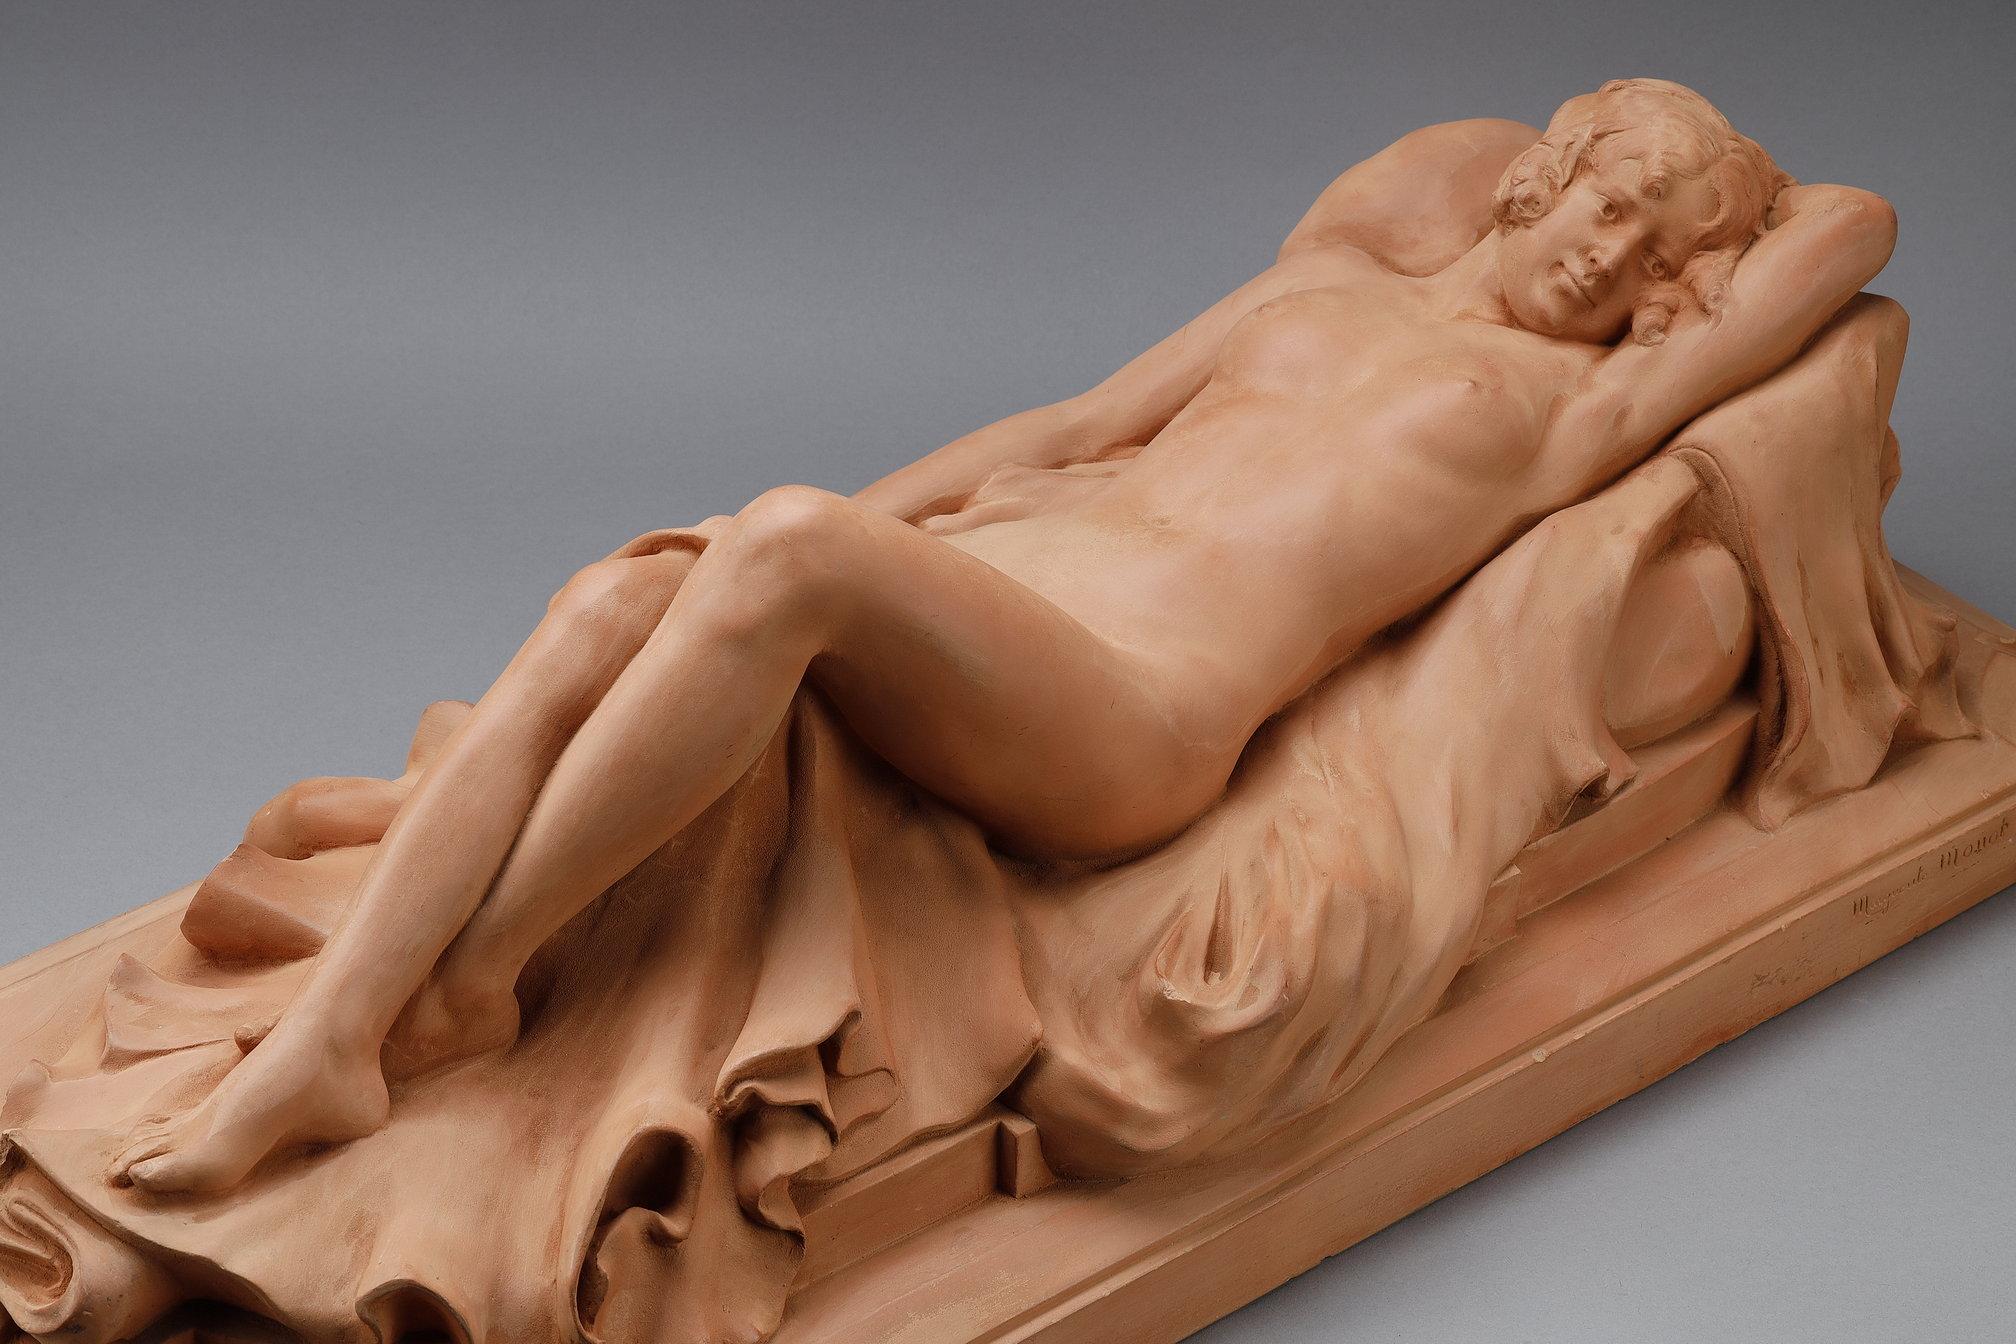 Large terracotta sculpture depicting an Odalisque reclining on a drape For Sale 2